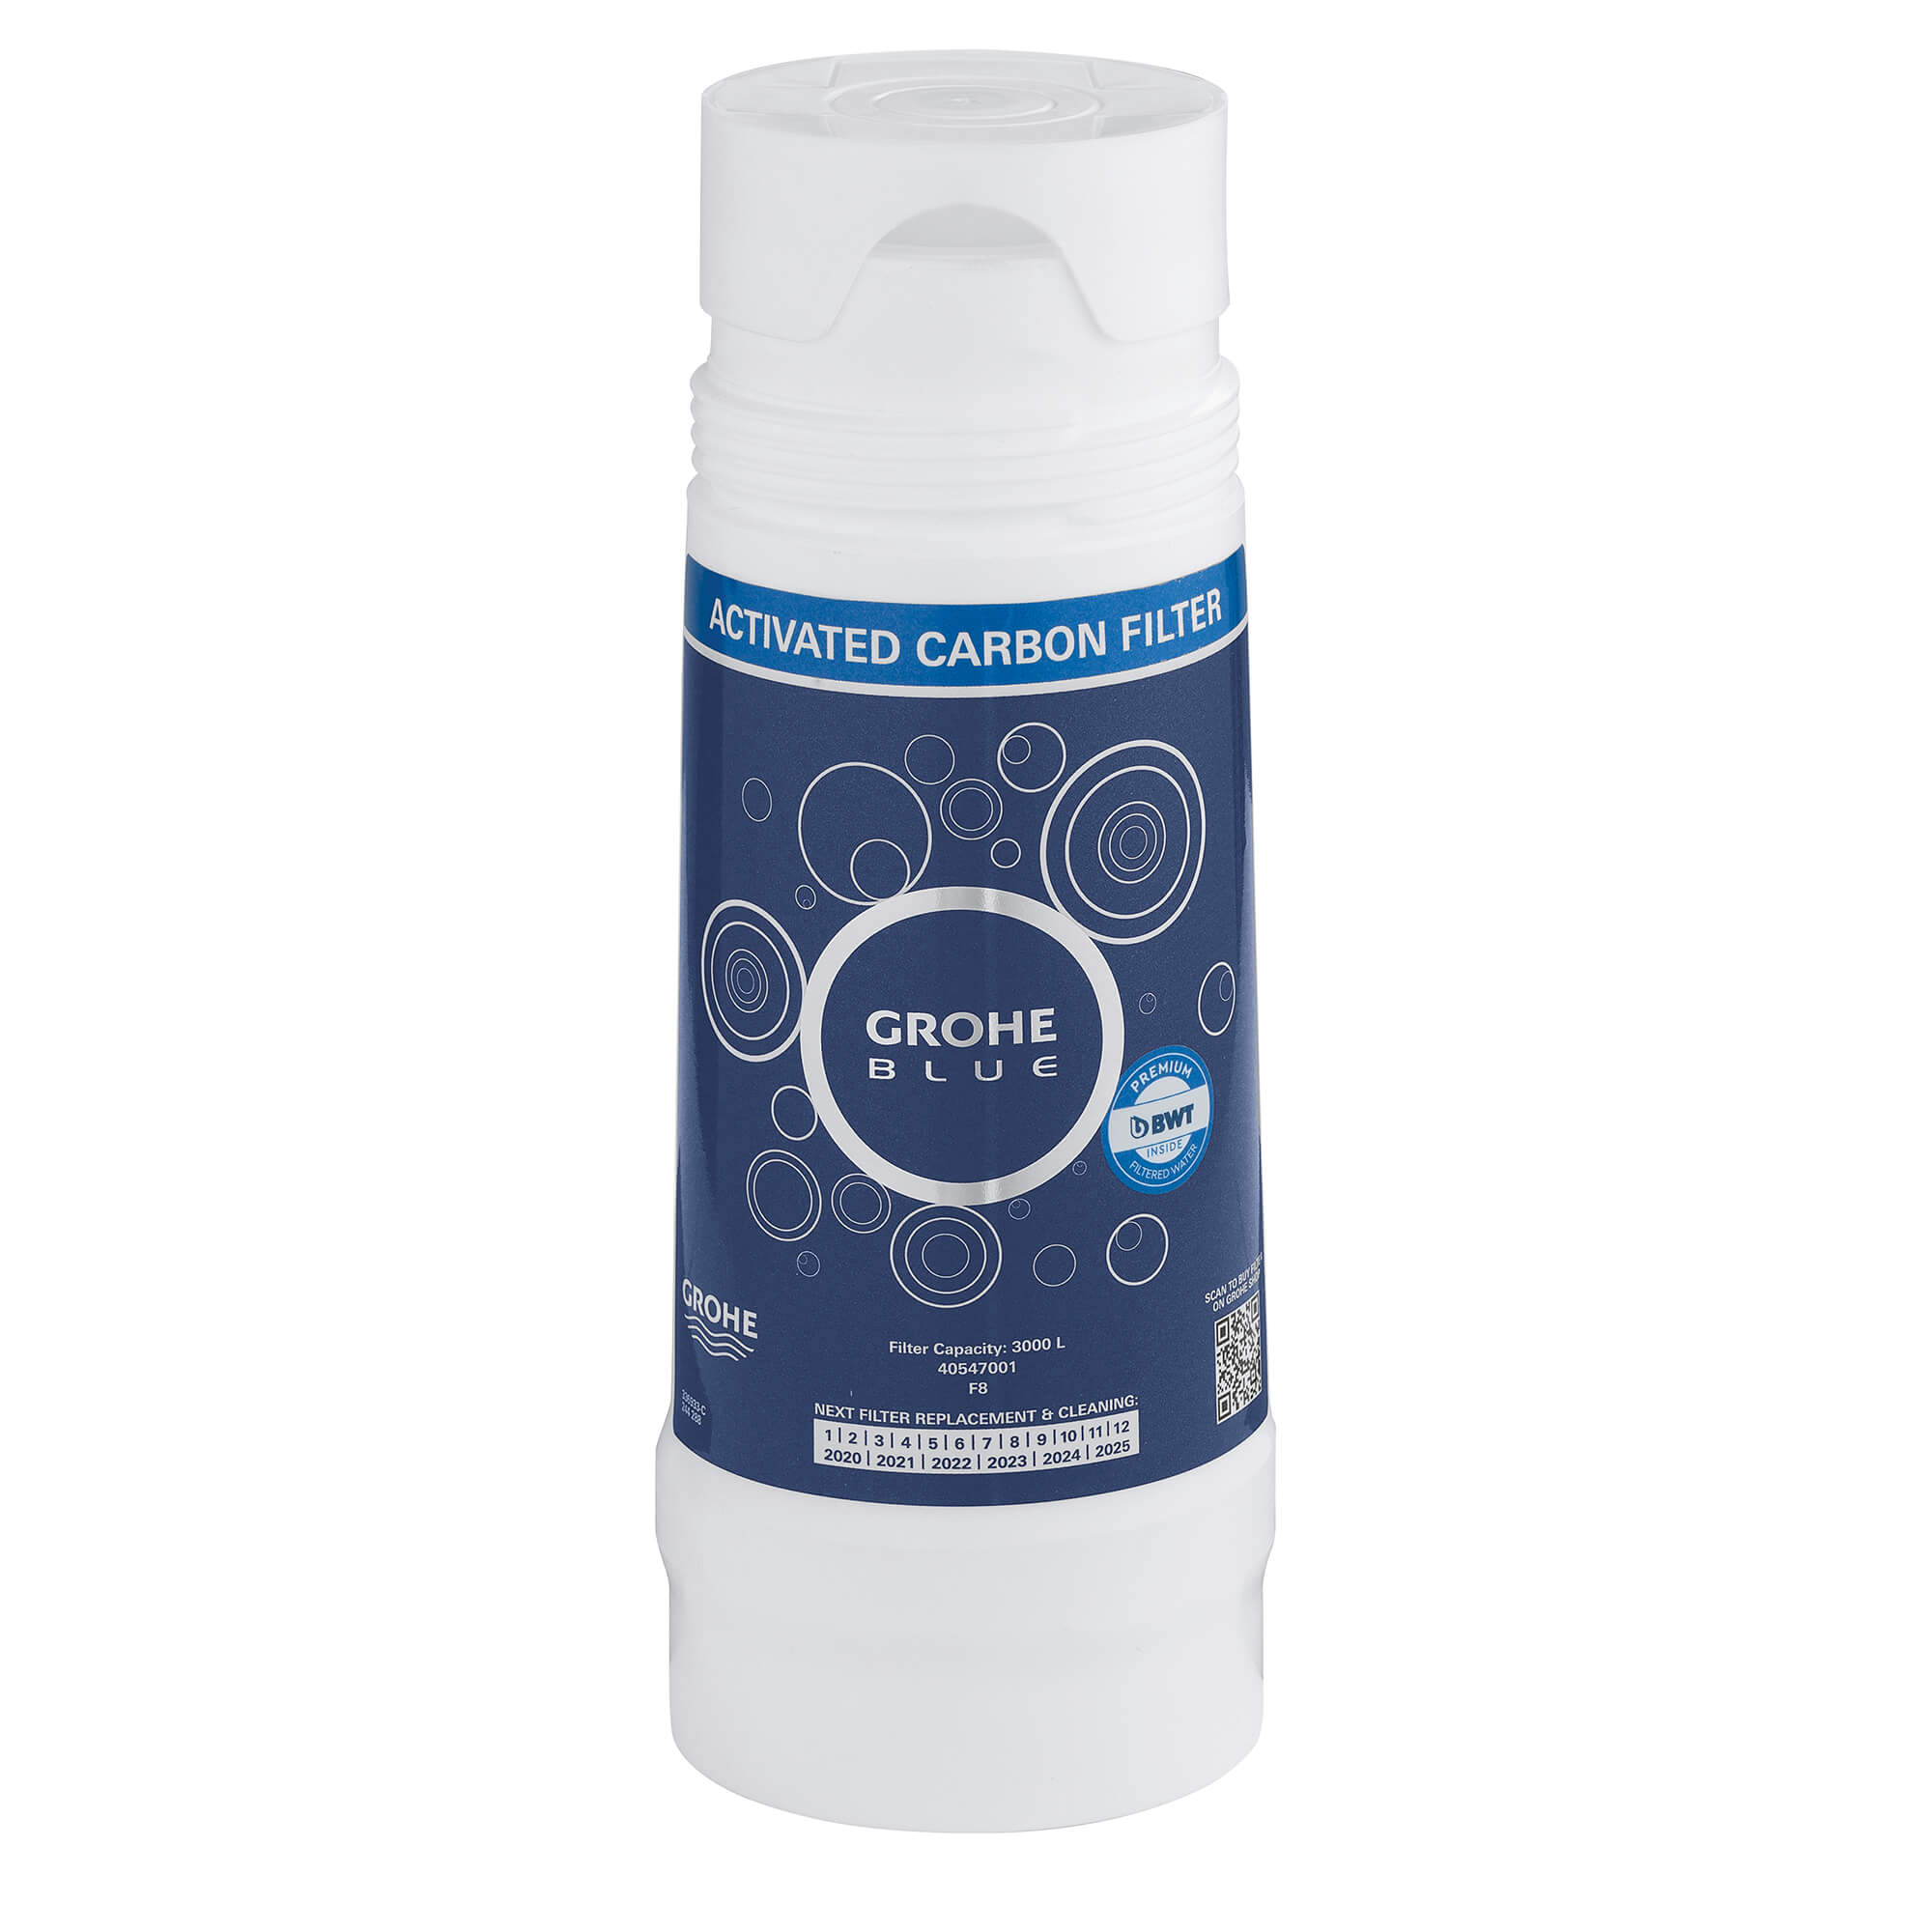 GROHE Blue® Carbon Filter